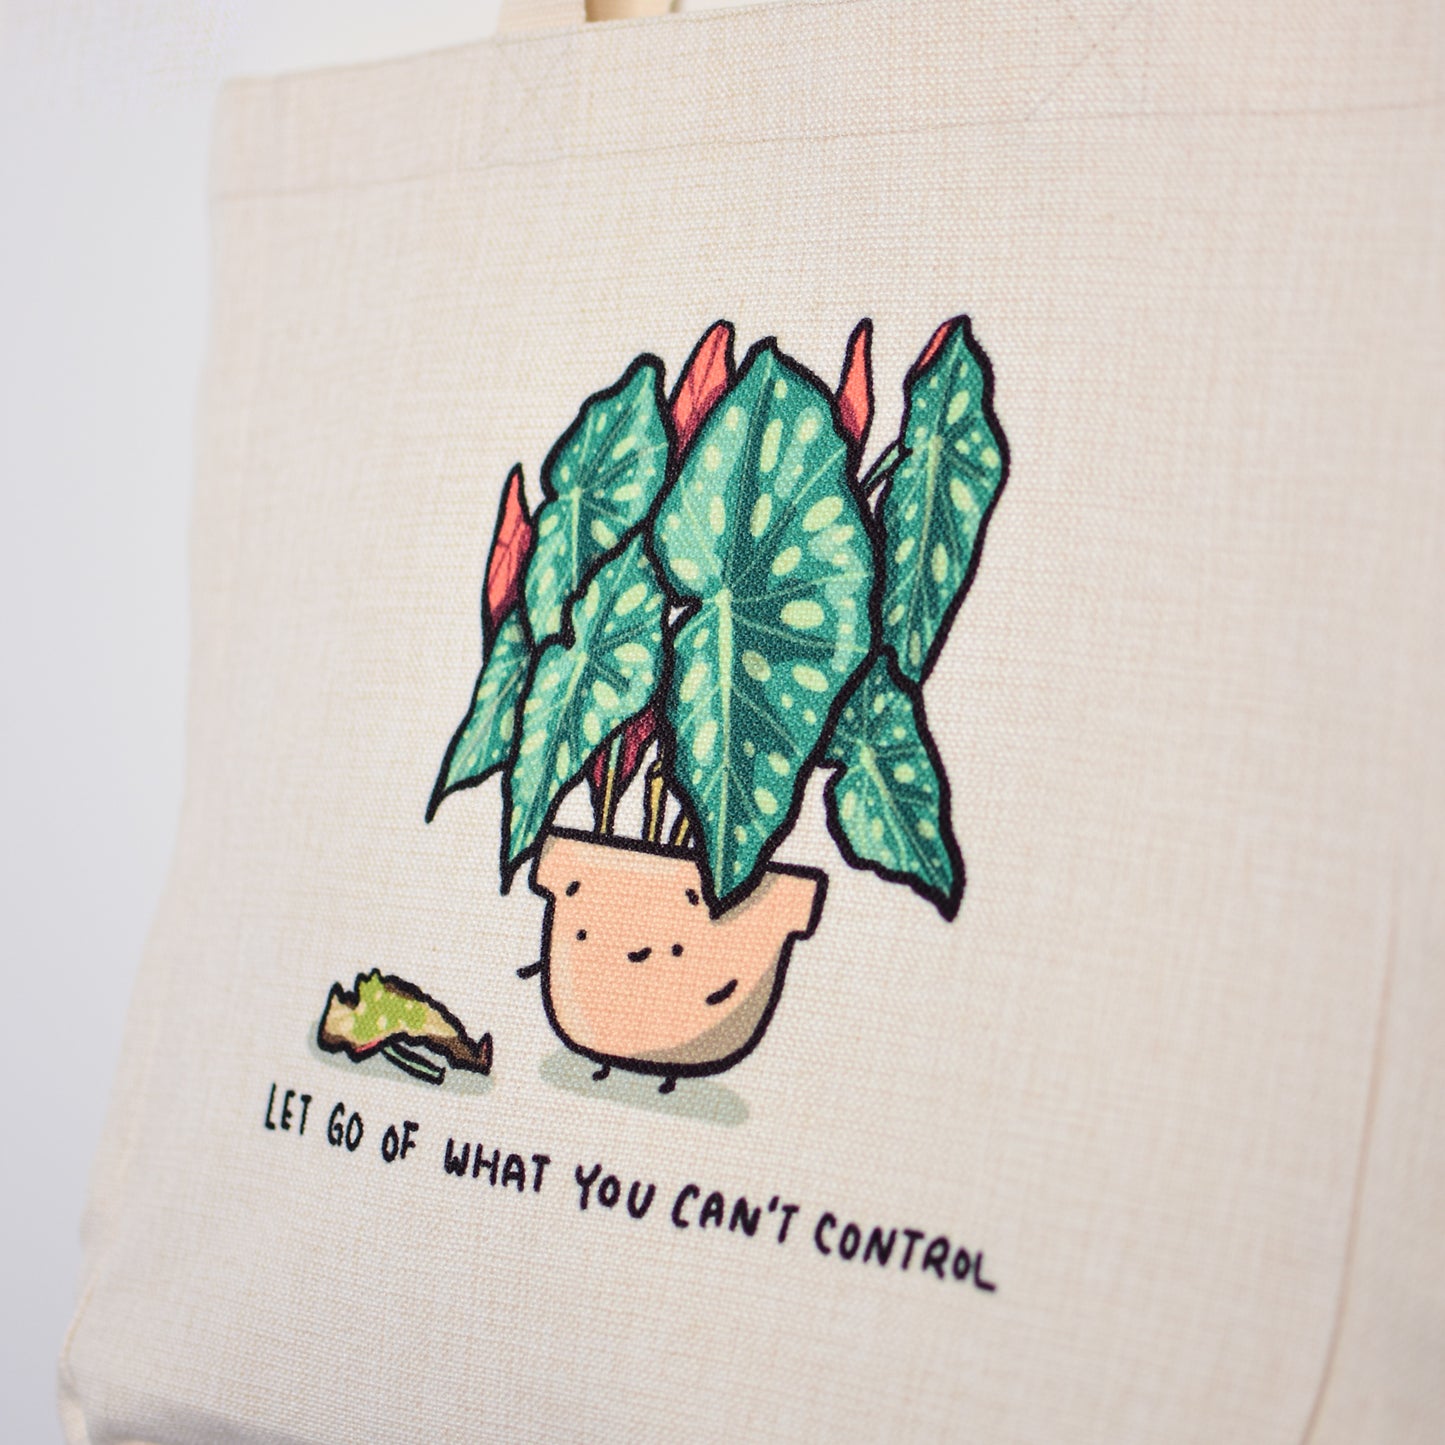 Let go of what you can't control Tote Bag